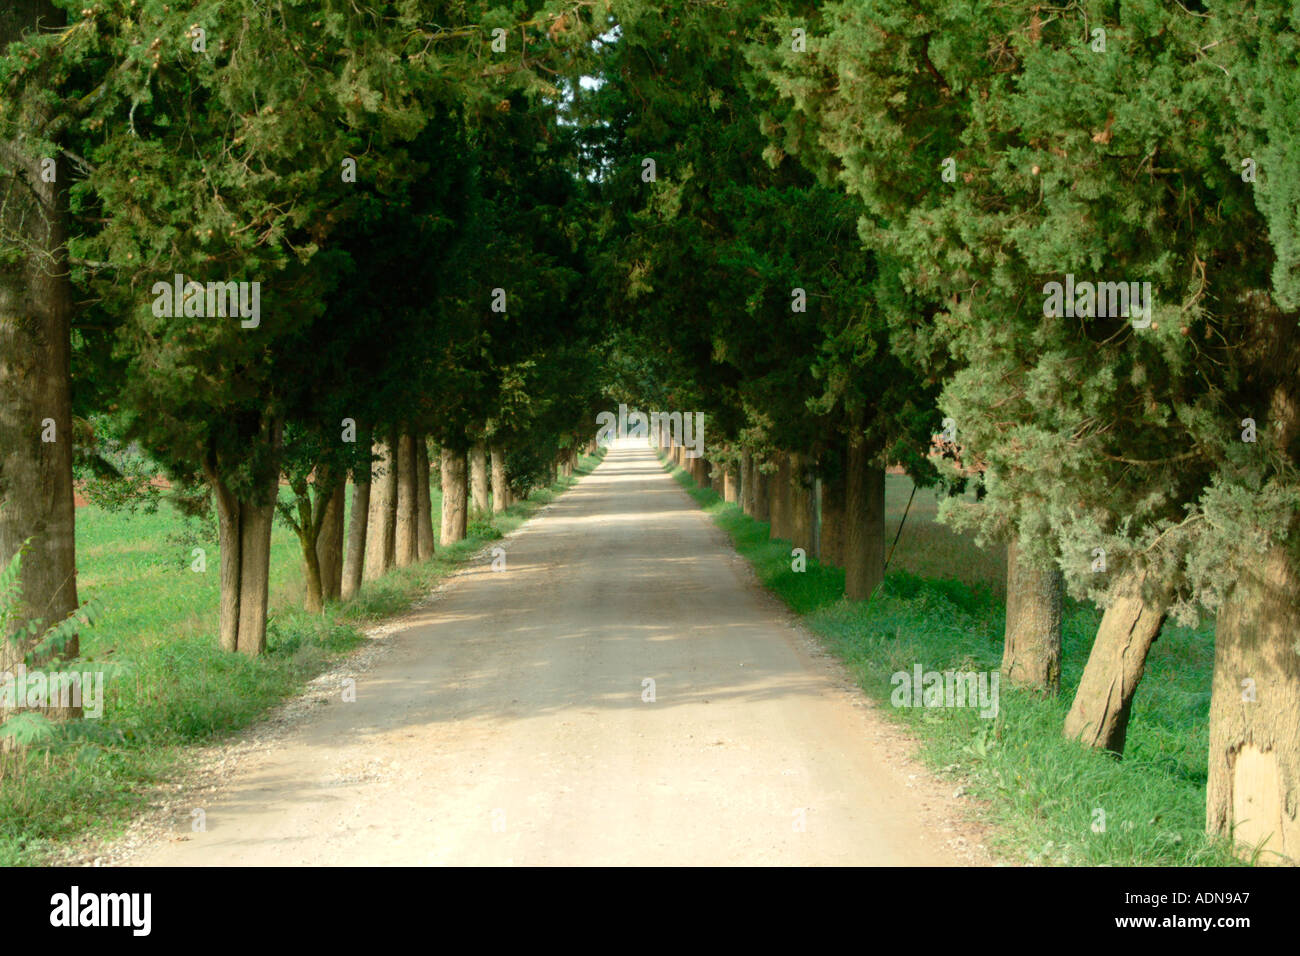 An avenue of Cypress trees on a strada bianca near Colle di Val d Elsa Tuscany Italy Stock Photo